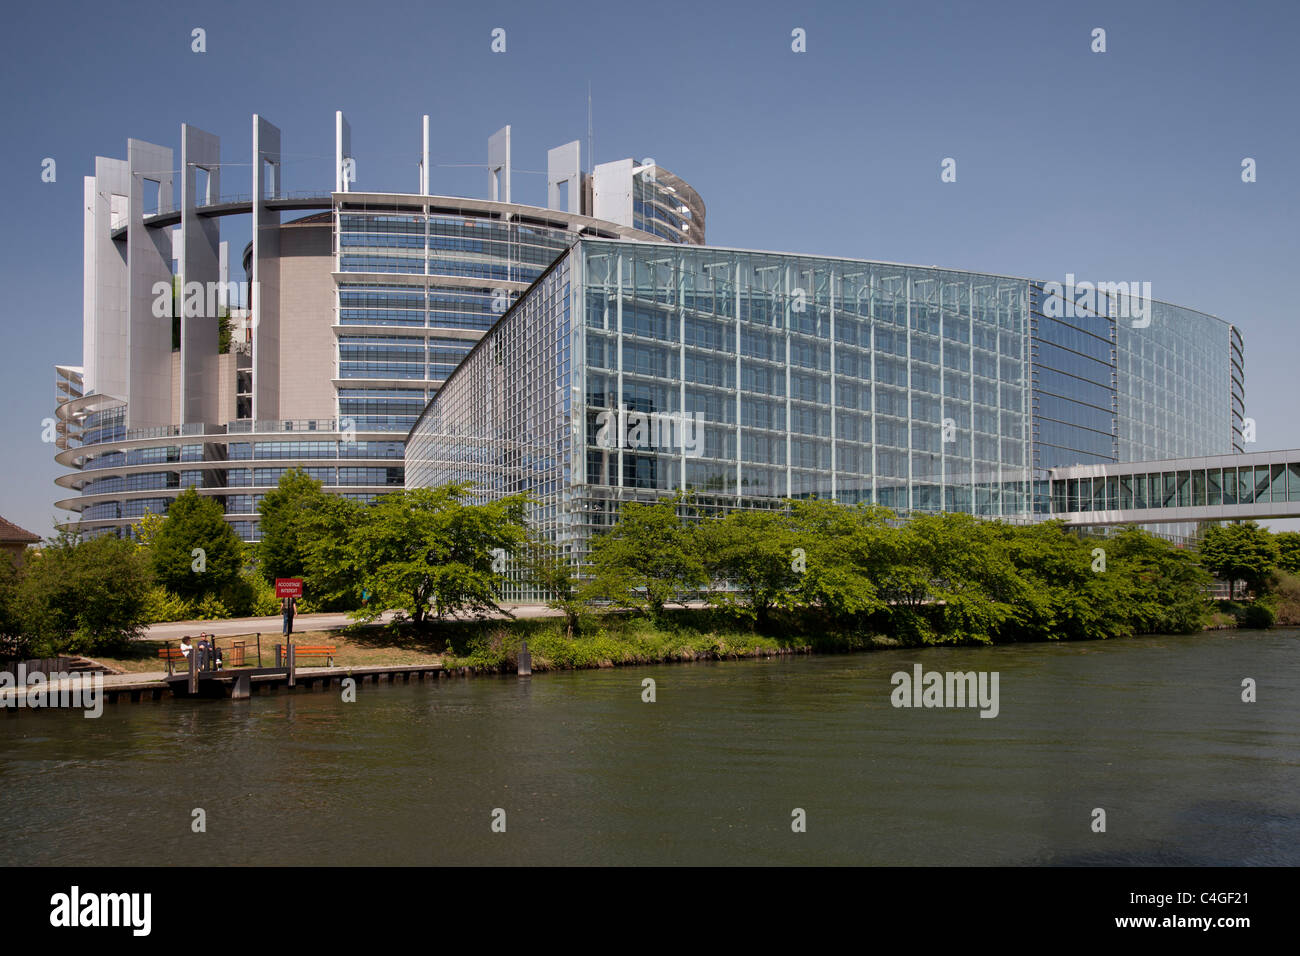 Government building of the European Union in Strasbourg France Stock Photo